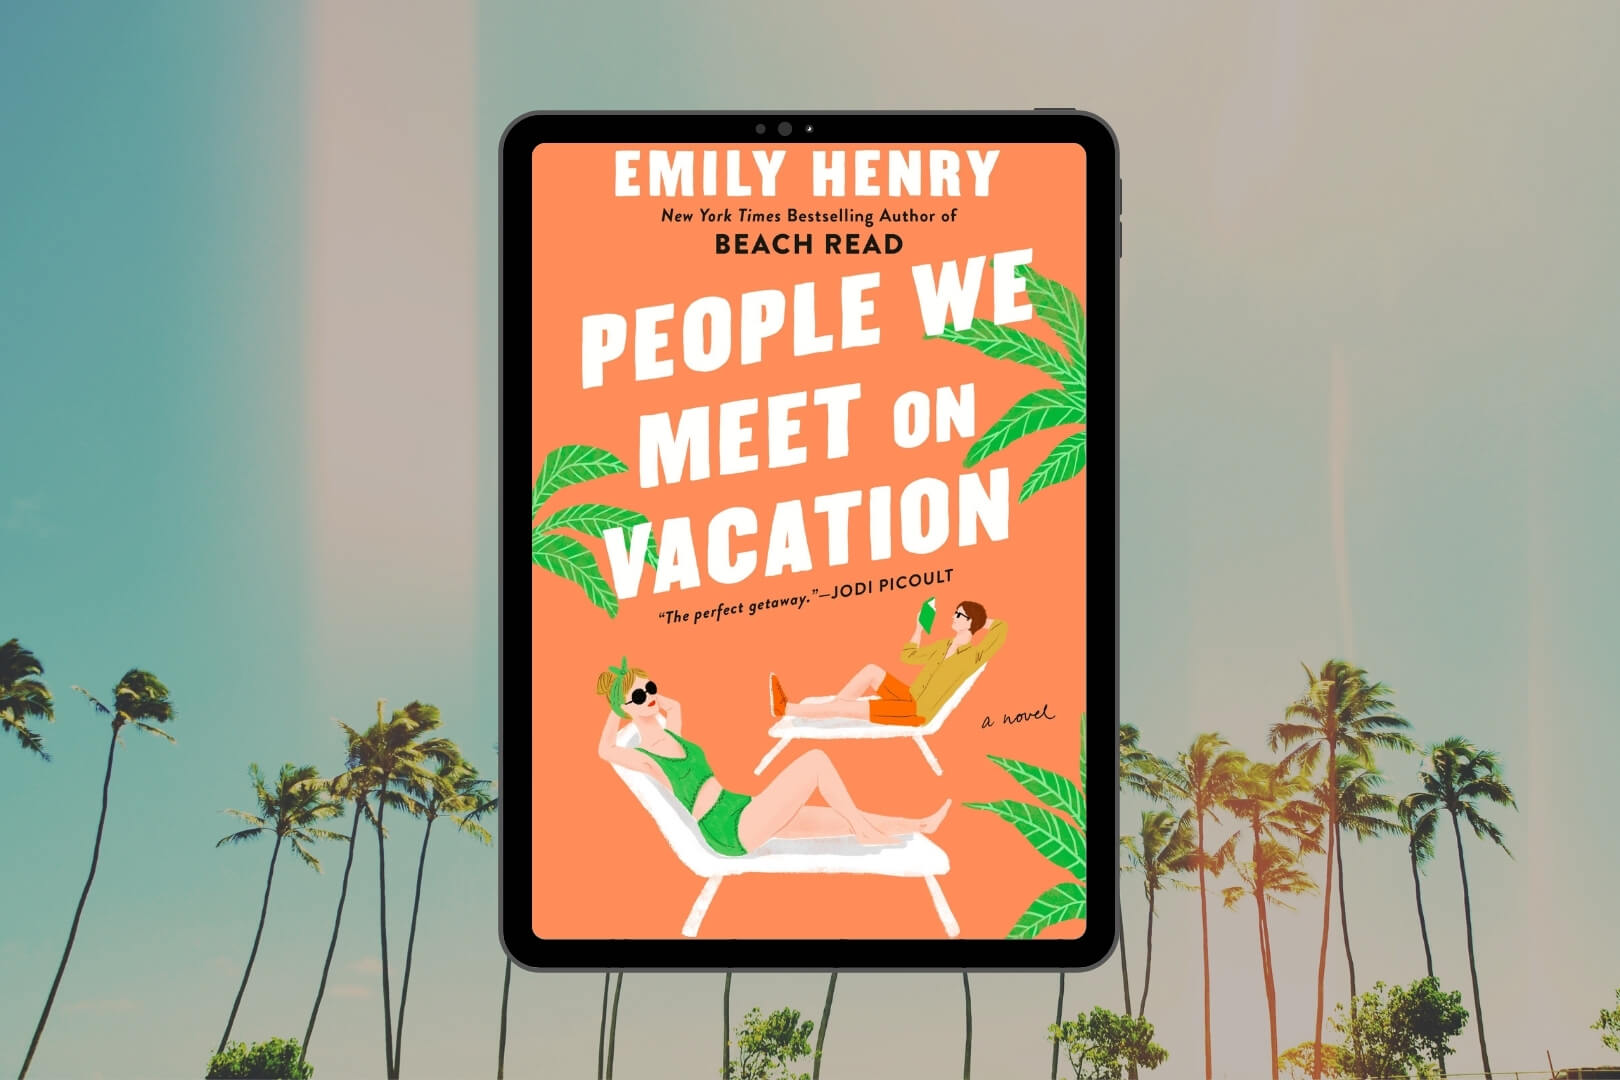 Review: People We Meet on Vacation by Emily Henry